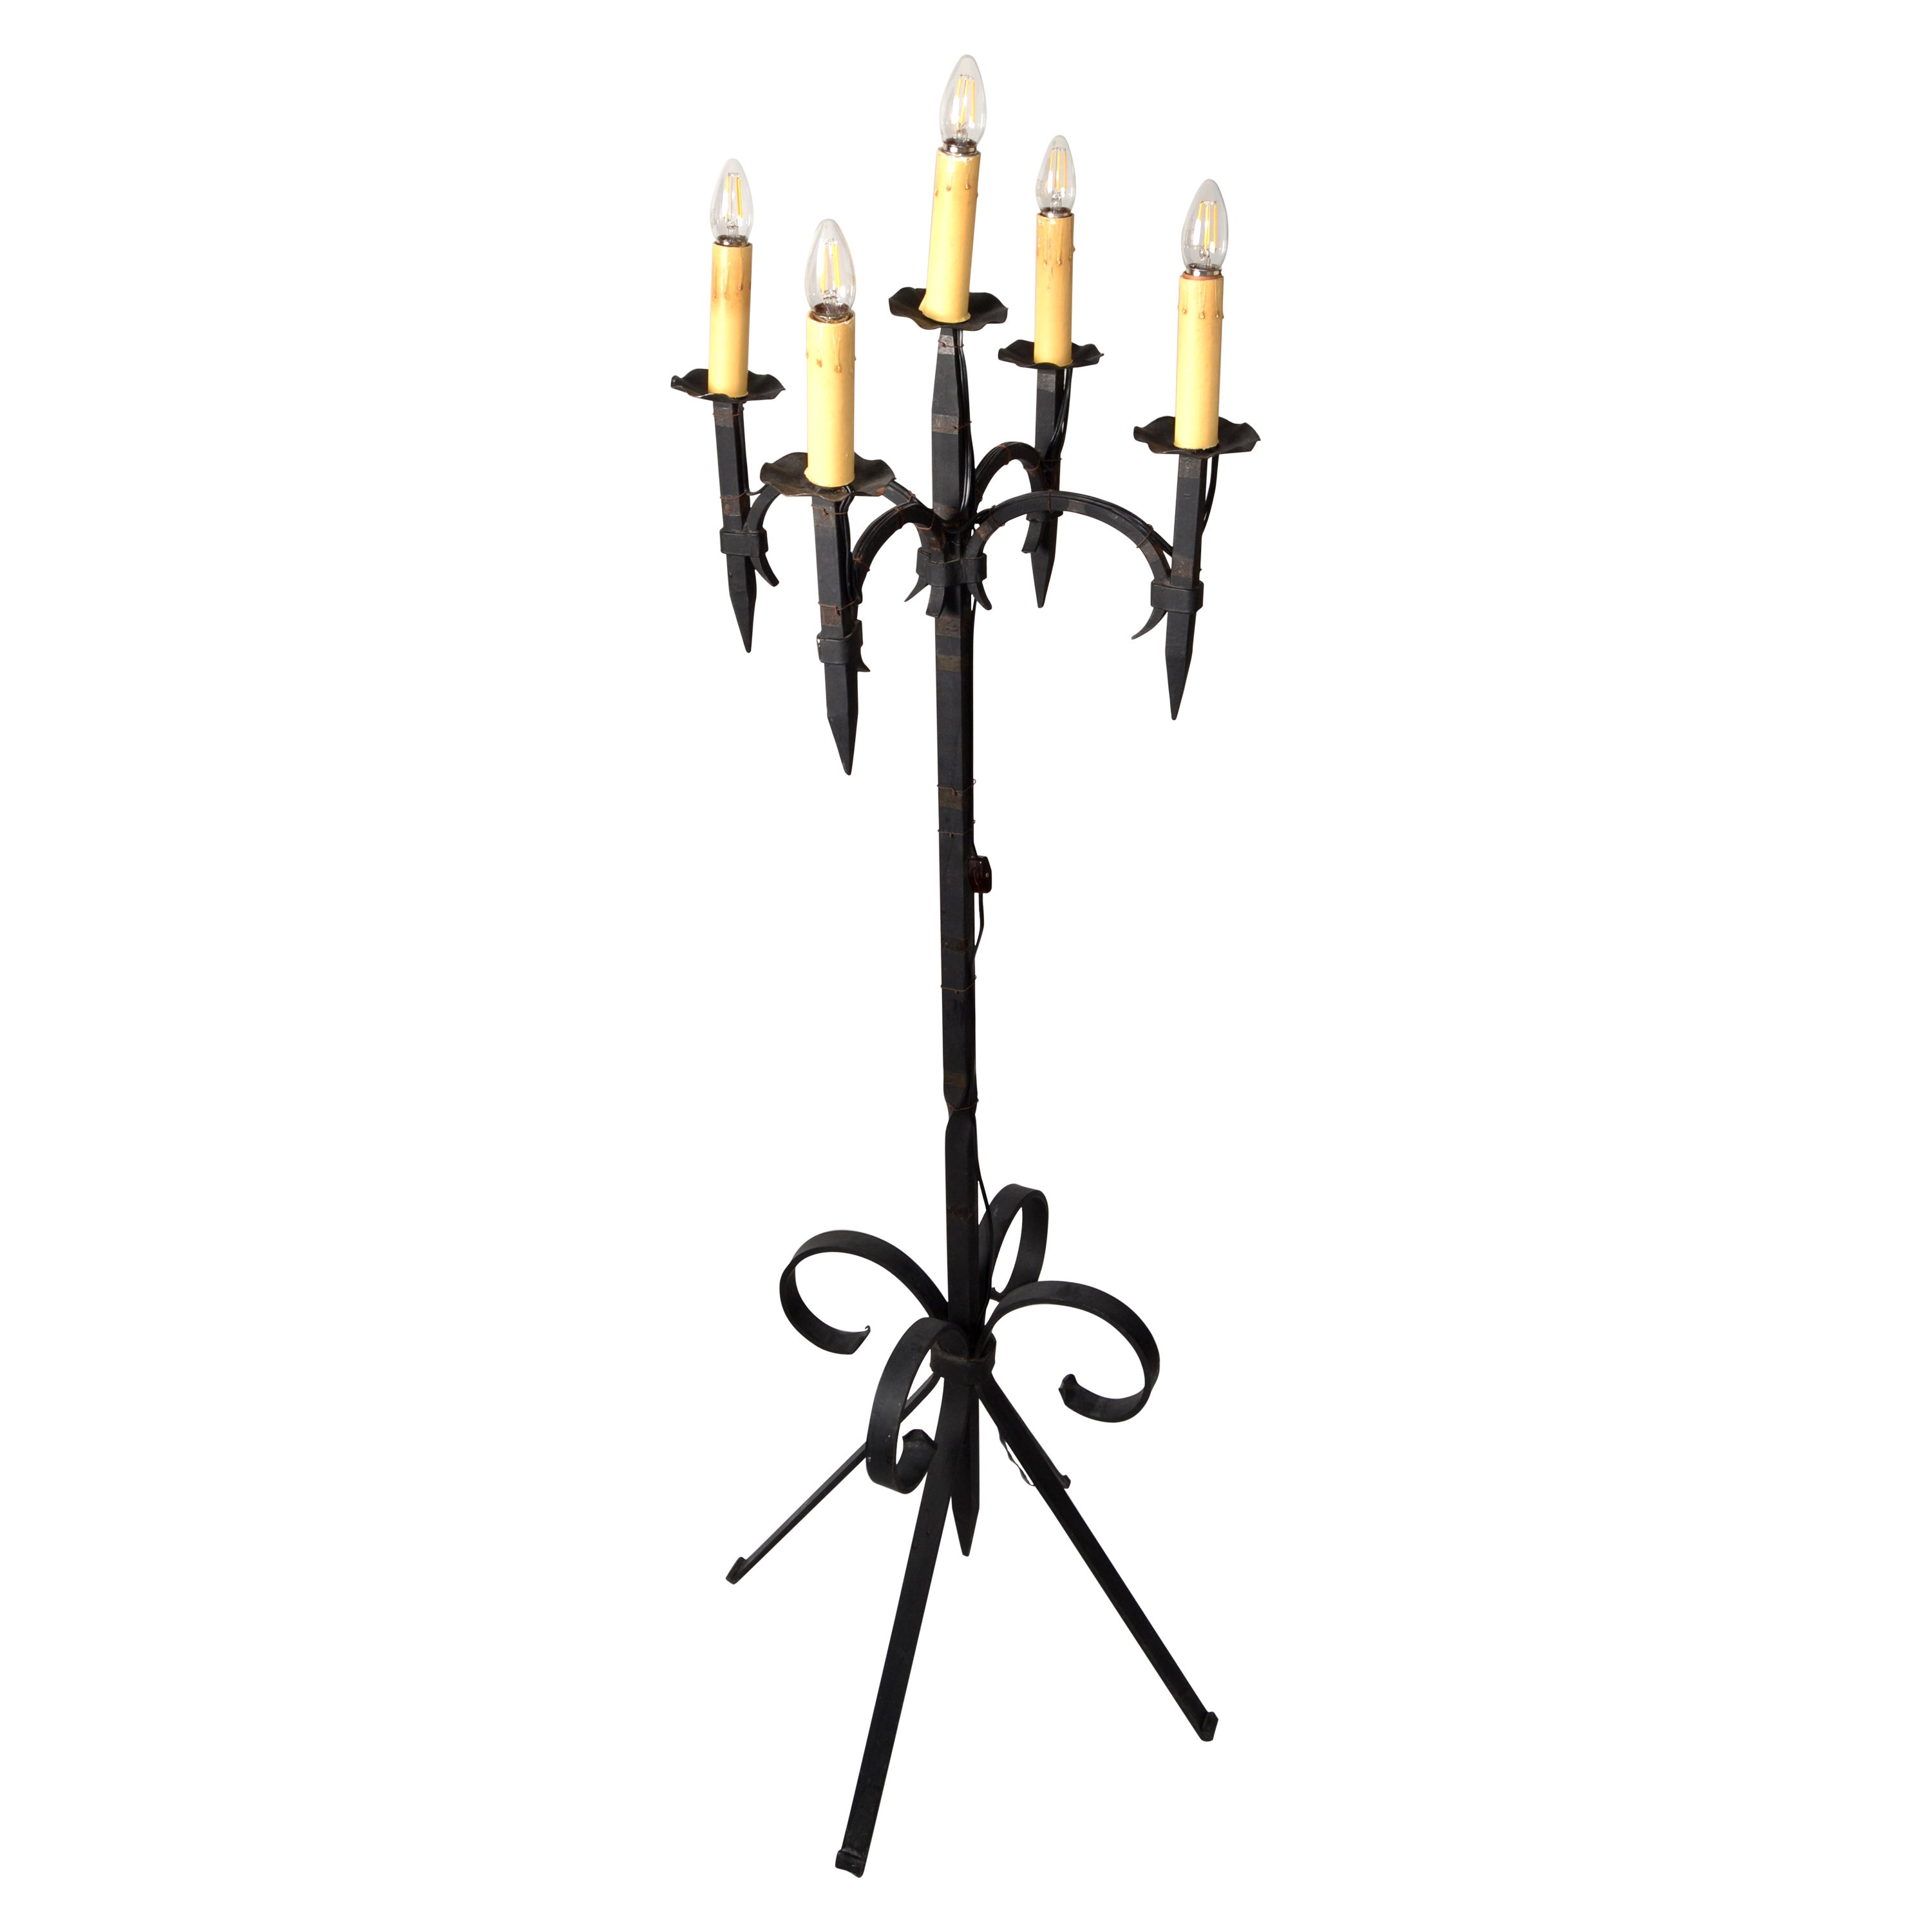 Early 20th Century French Forged Wrought Iron 5 Light Candelabra Floor Lamp For Sale